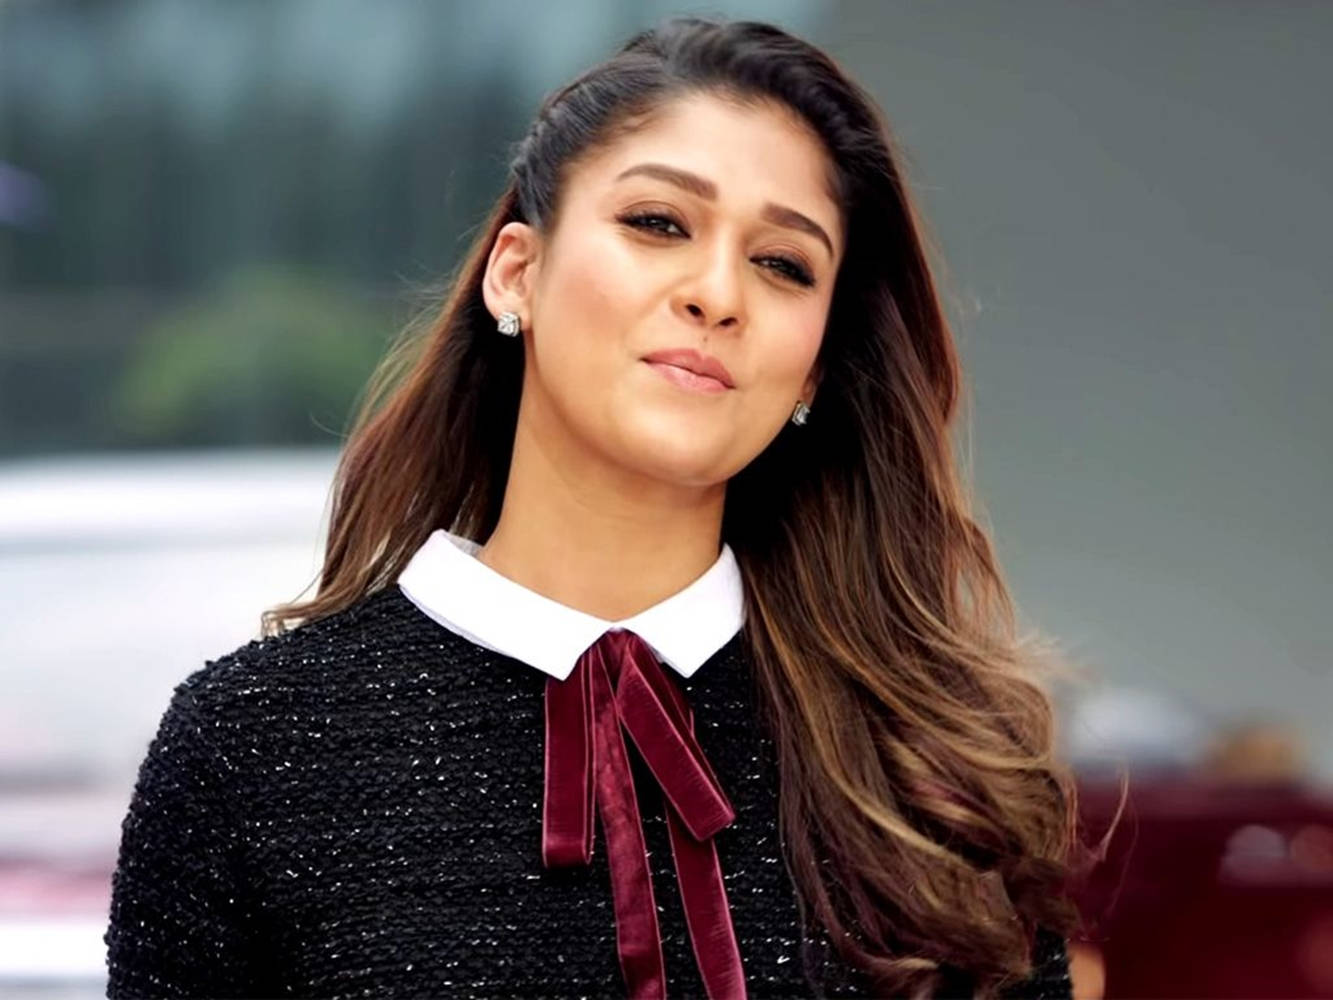 Captivating Nayanthara In A Stylish Black Ensemble With A Red Tie